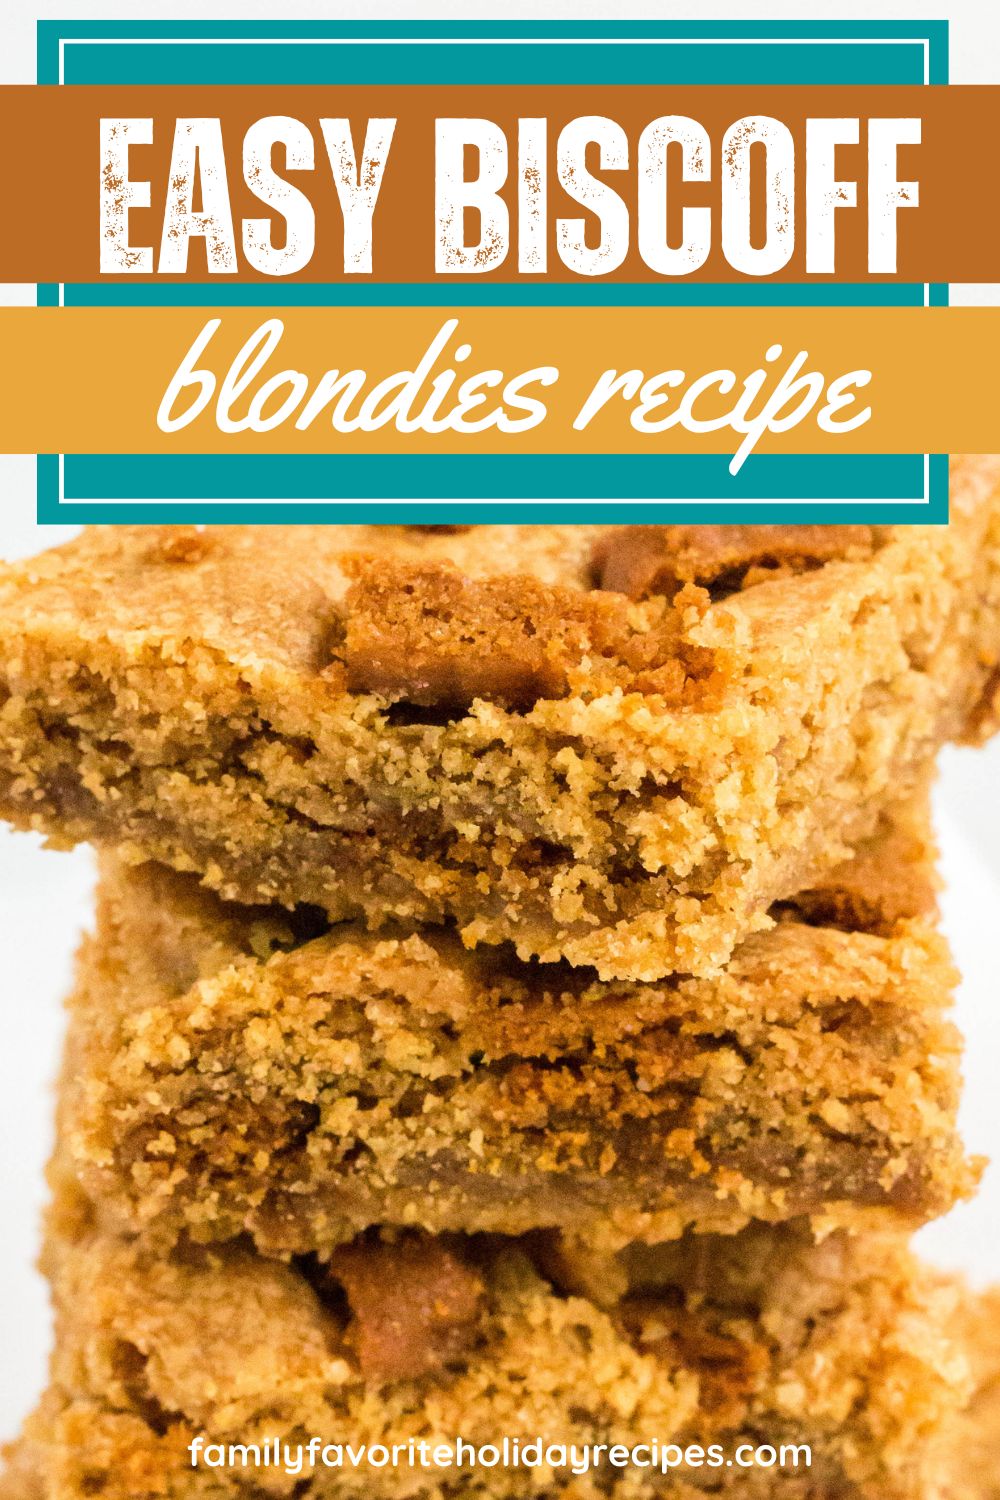 several Biscoff blondies stacked on top of each other